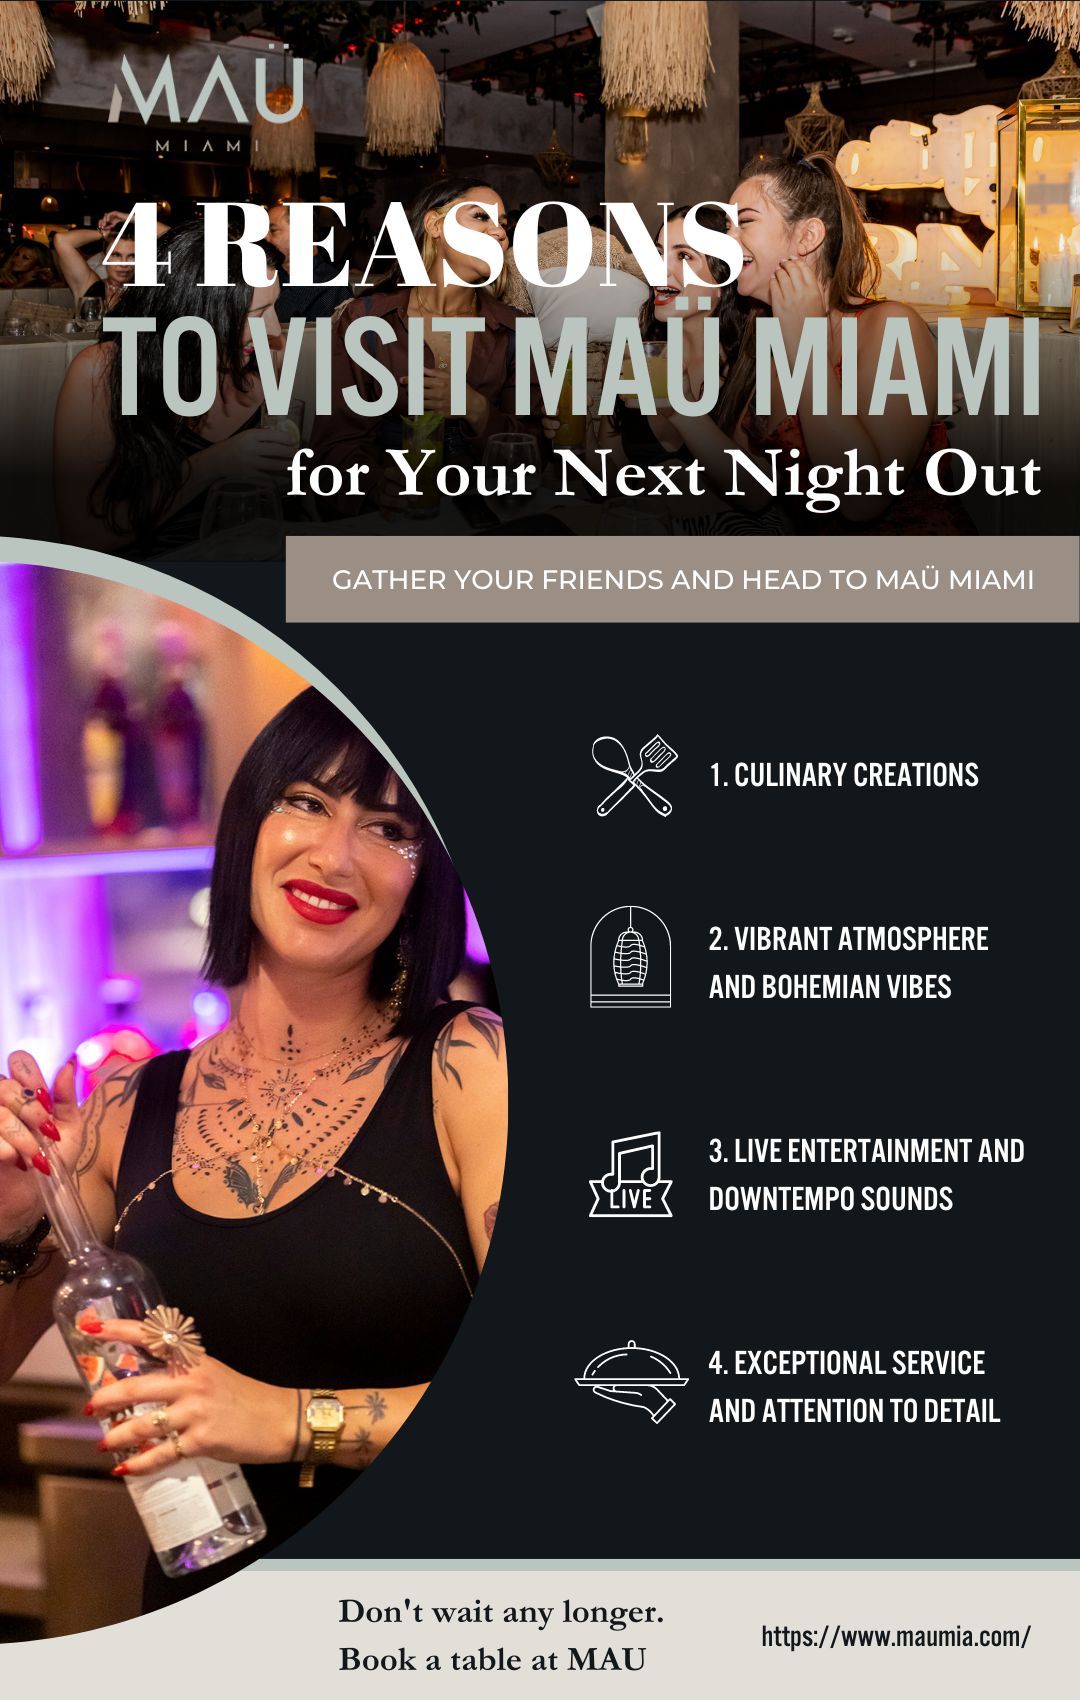 M38202 - IG - 4 Reasons to Visit MAU Miami for Your Next Night Out.jpg